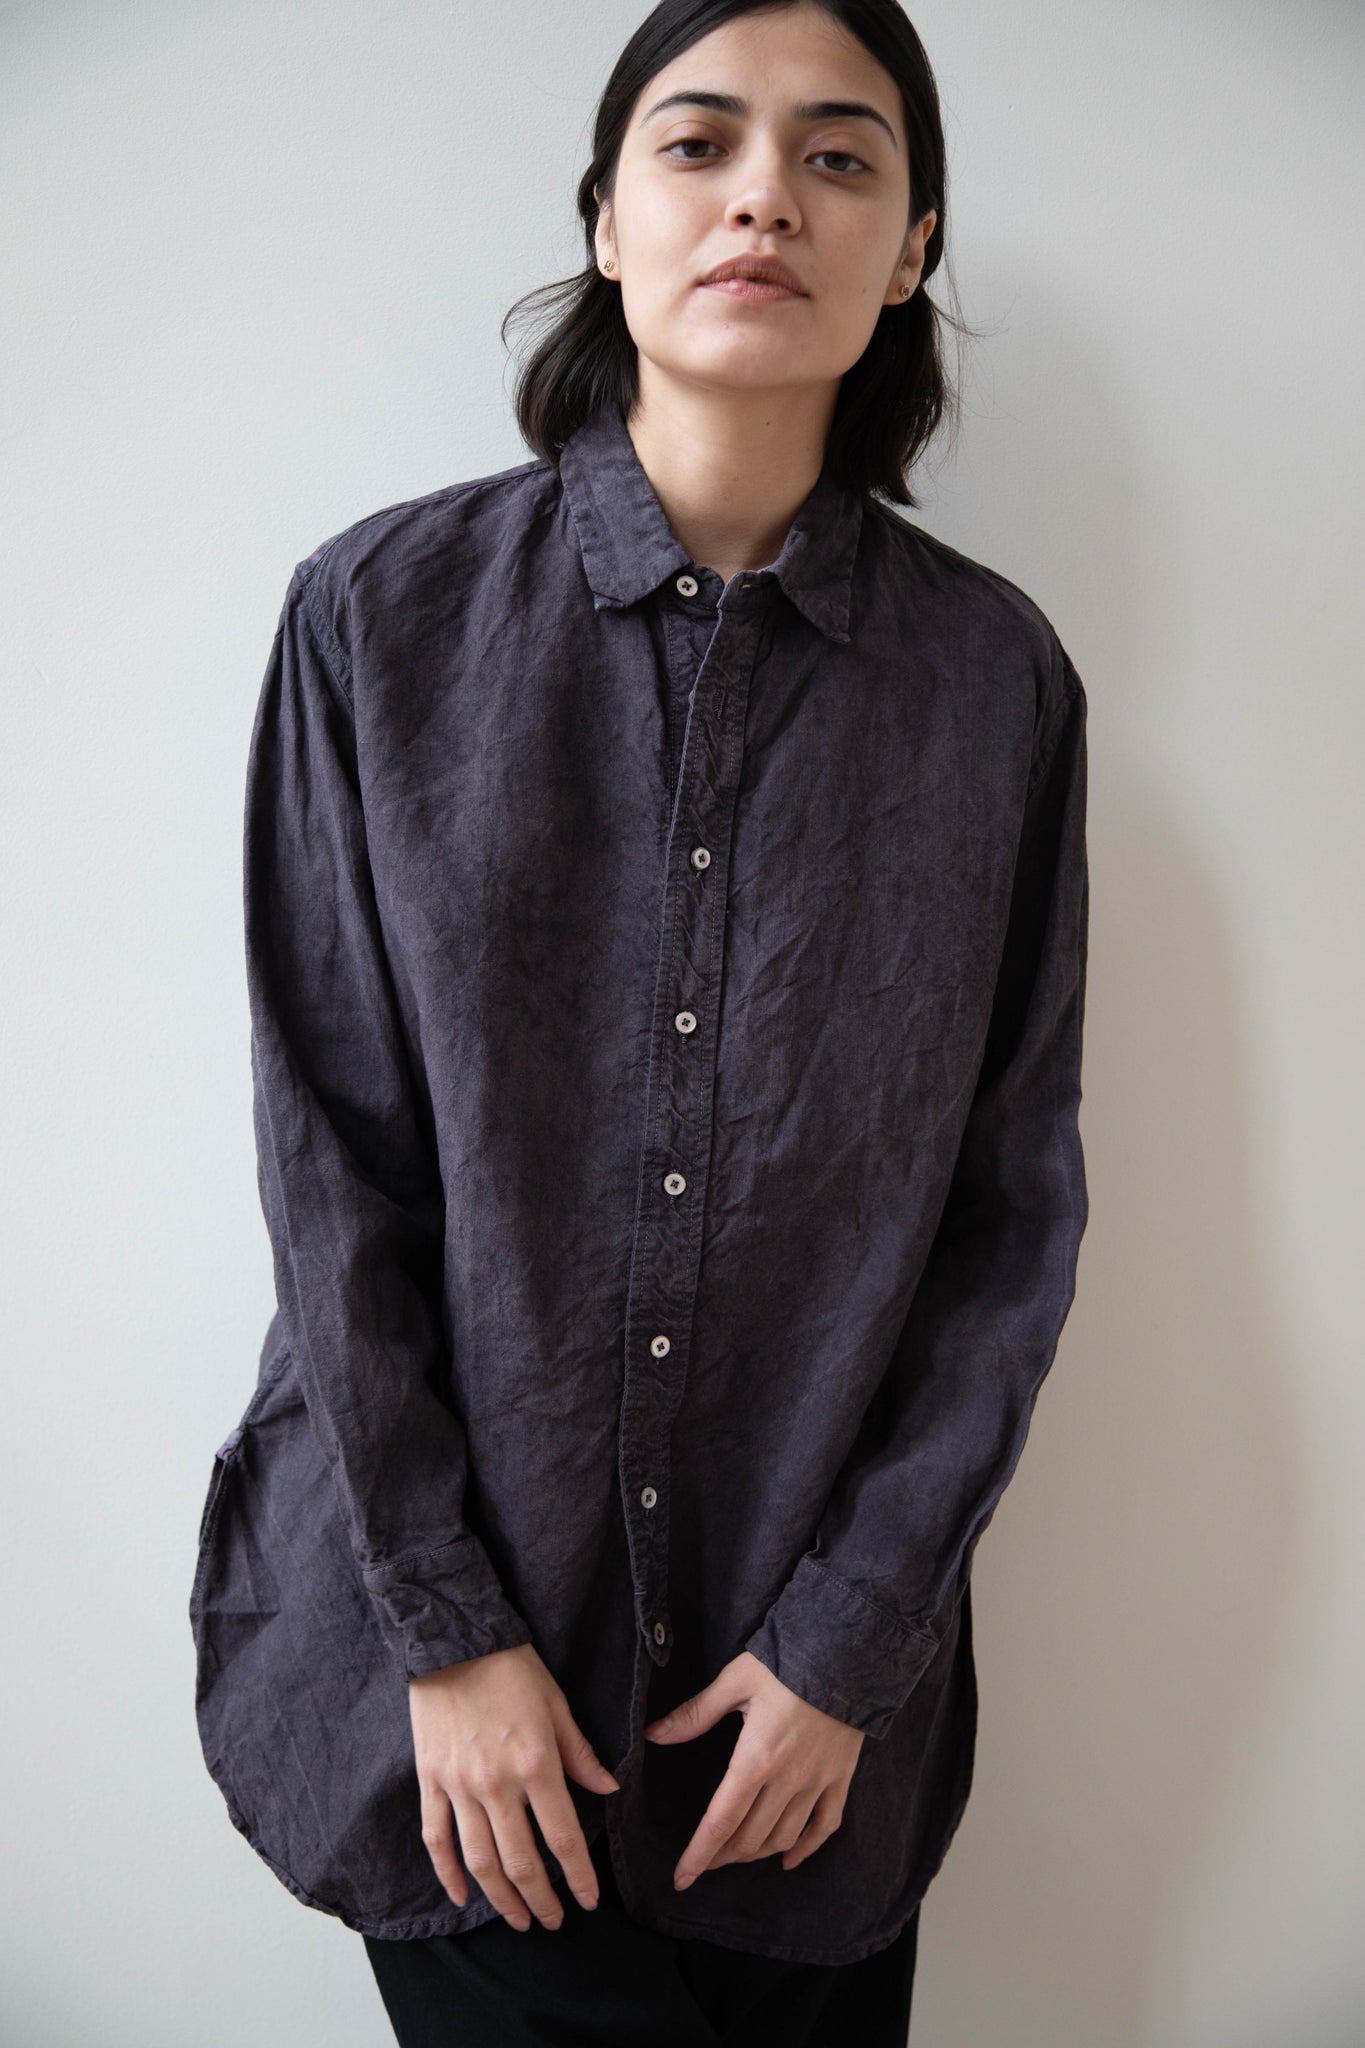 Oliver Church | Scalloped Shirt in Anthracite Antique Linen